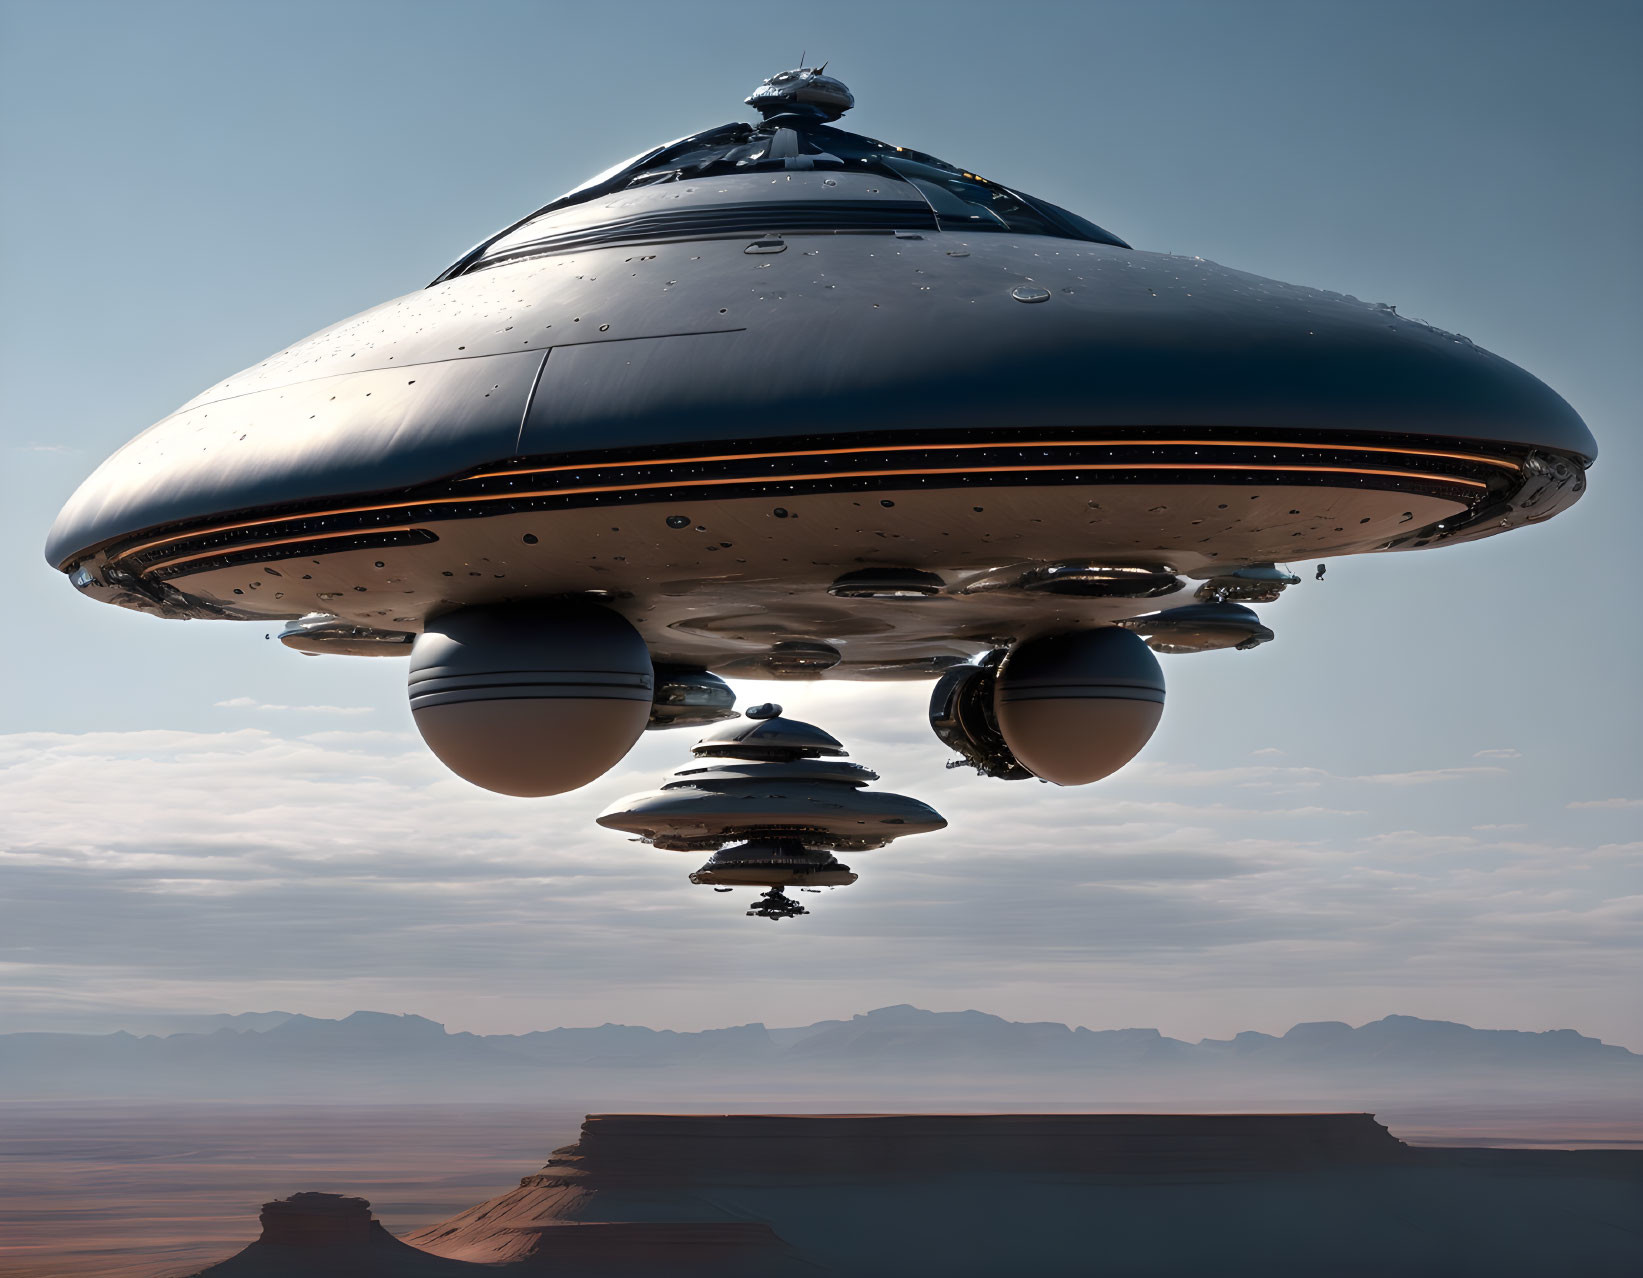 Detailed UFO hovering over desert landscape with mountains - clear sky view